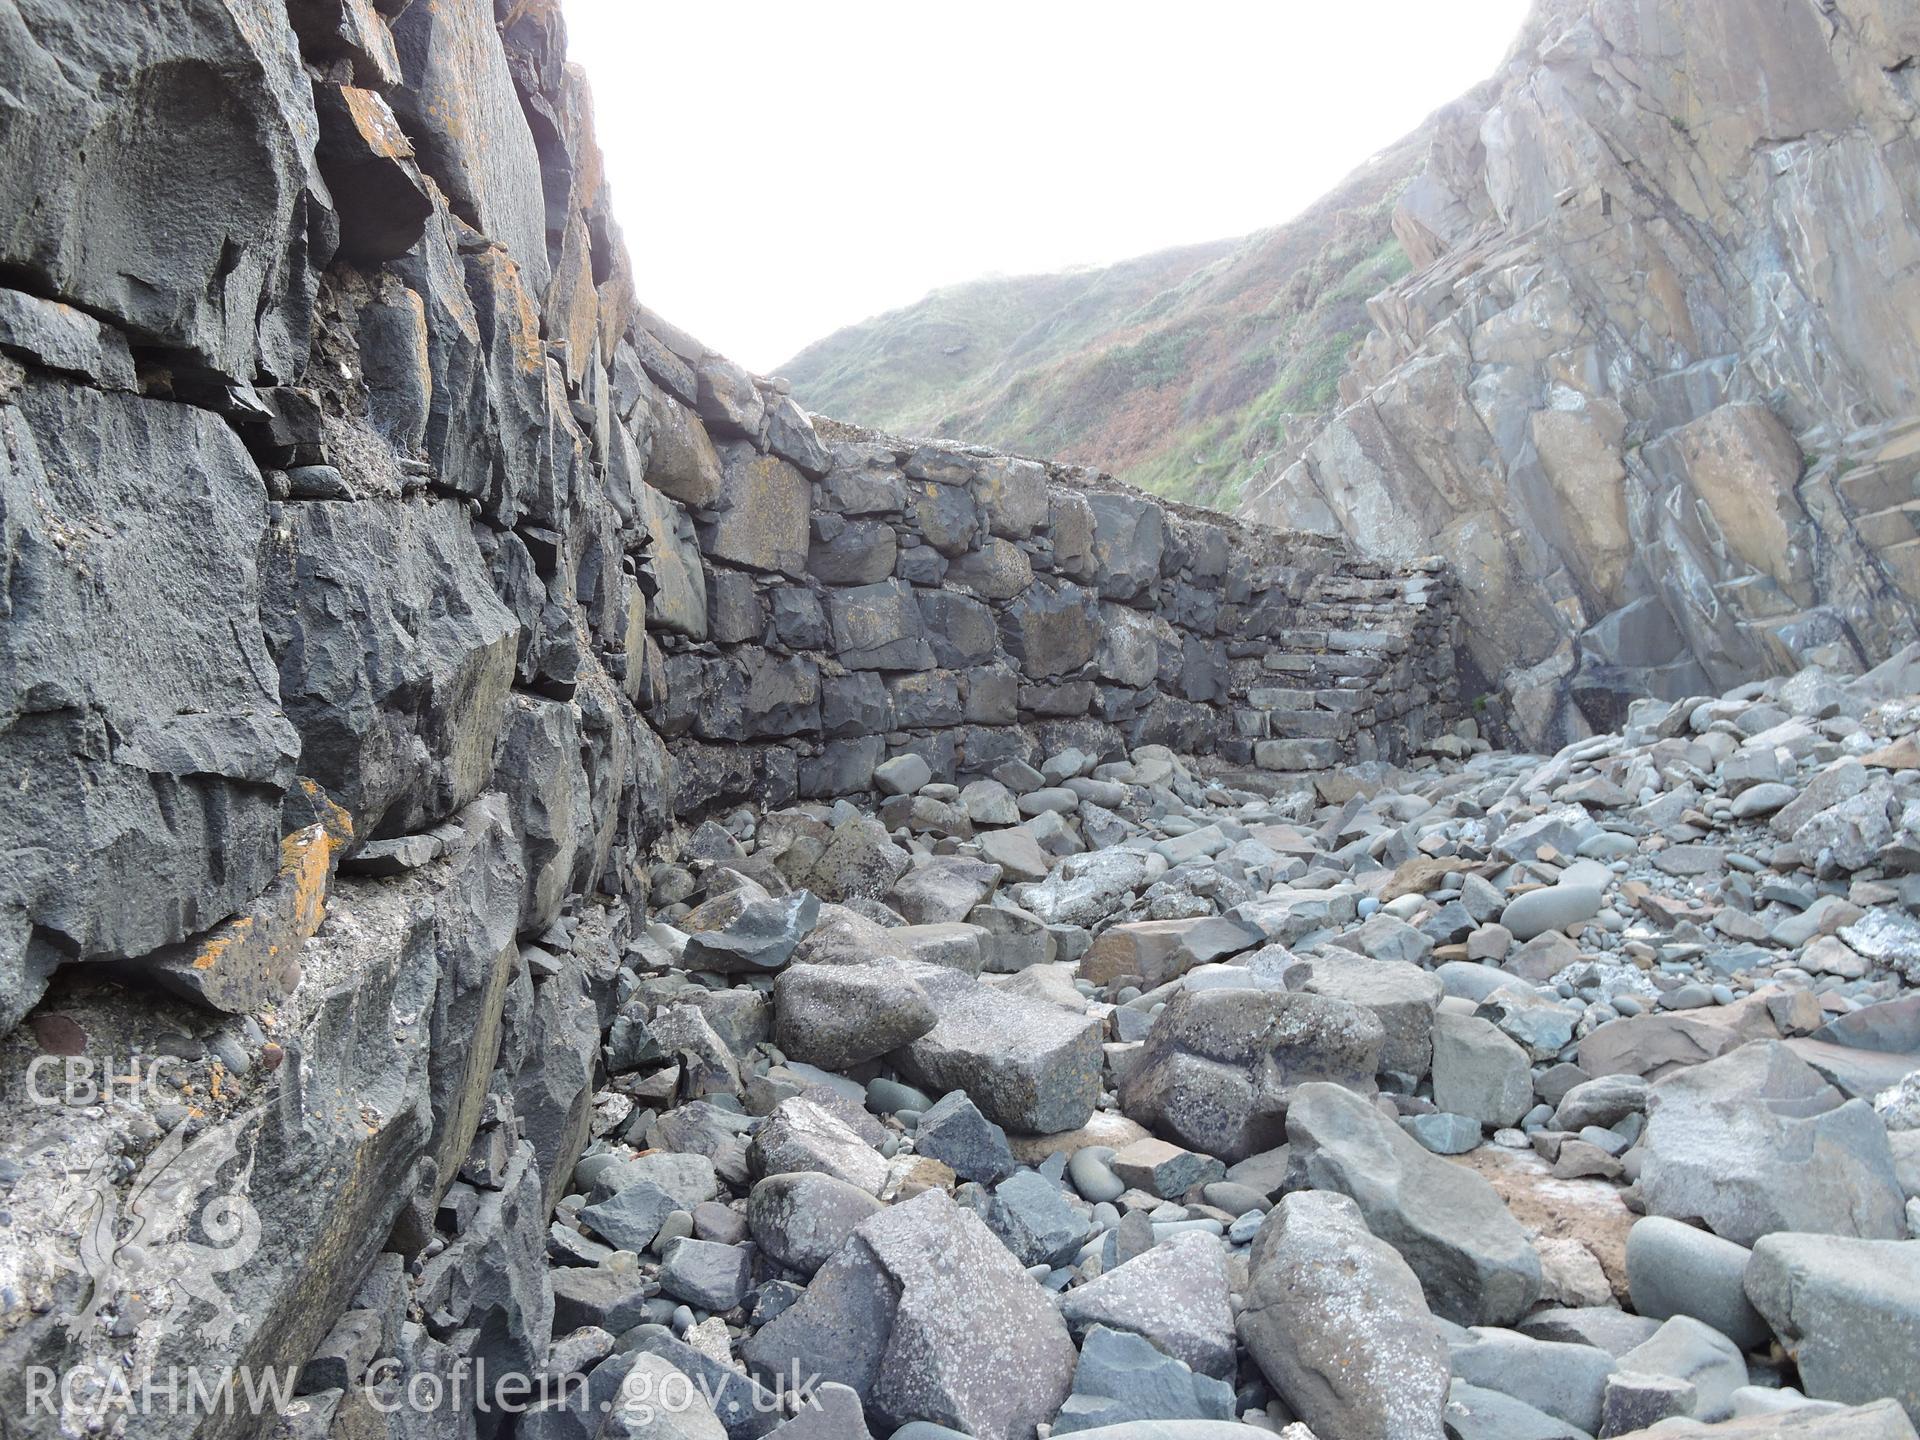 Deetailed view of quay wall, with stone steps built in at the far end. Part of a digital photographic survey of Porth y Pistyll, Aberdaron, produced in 2020 by Michael Statham.